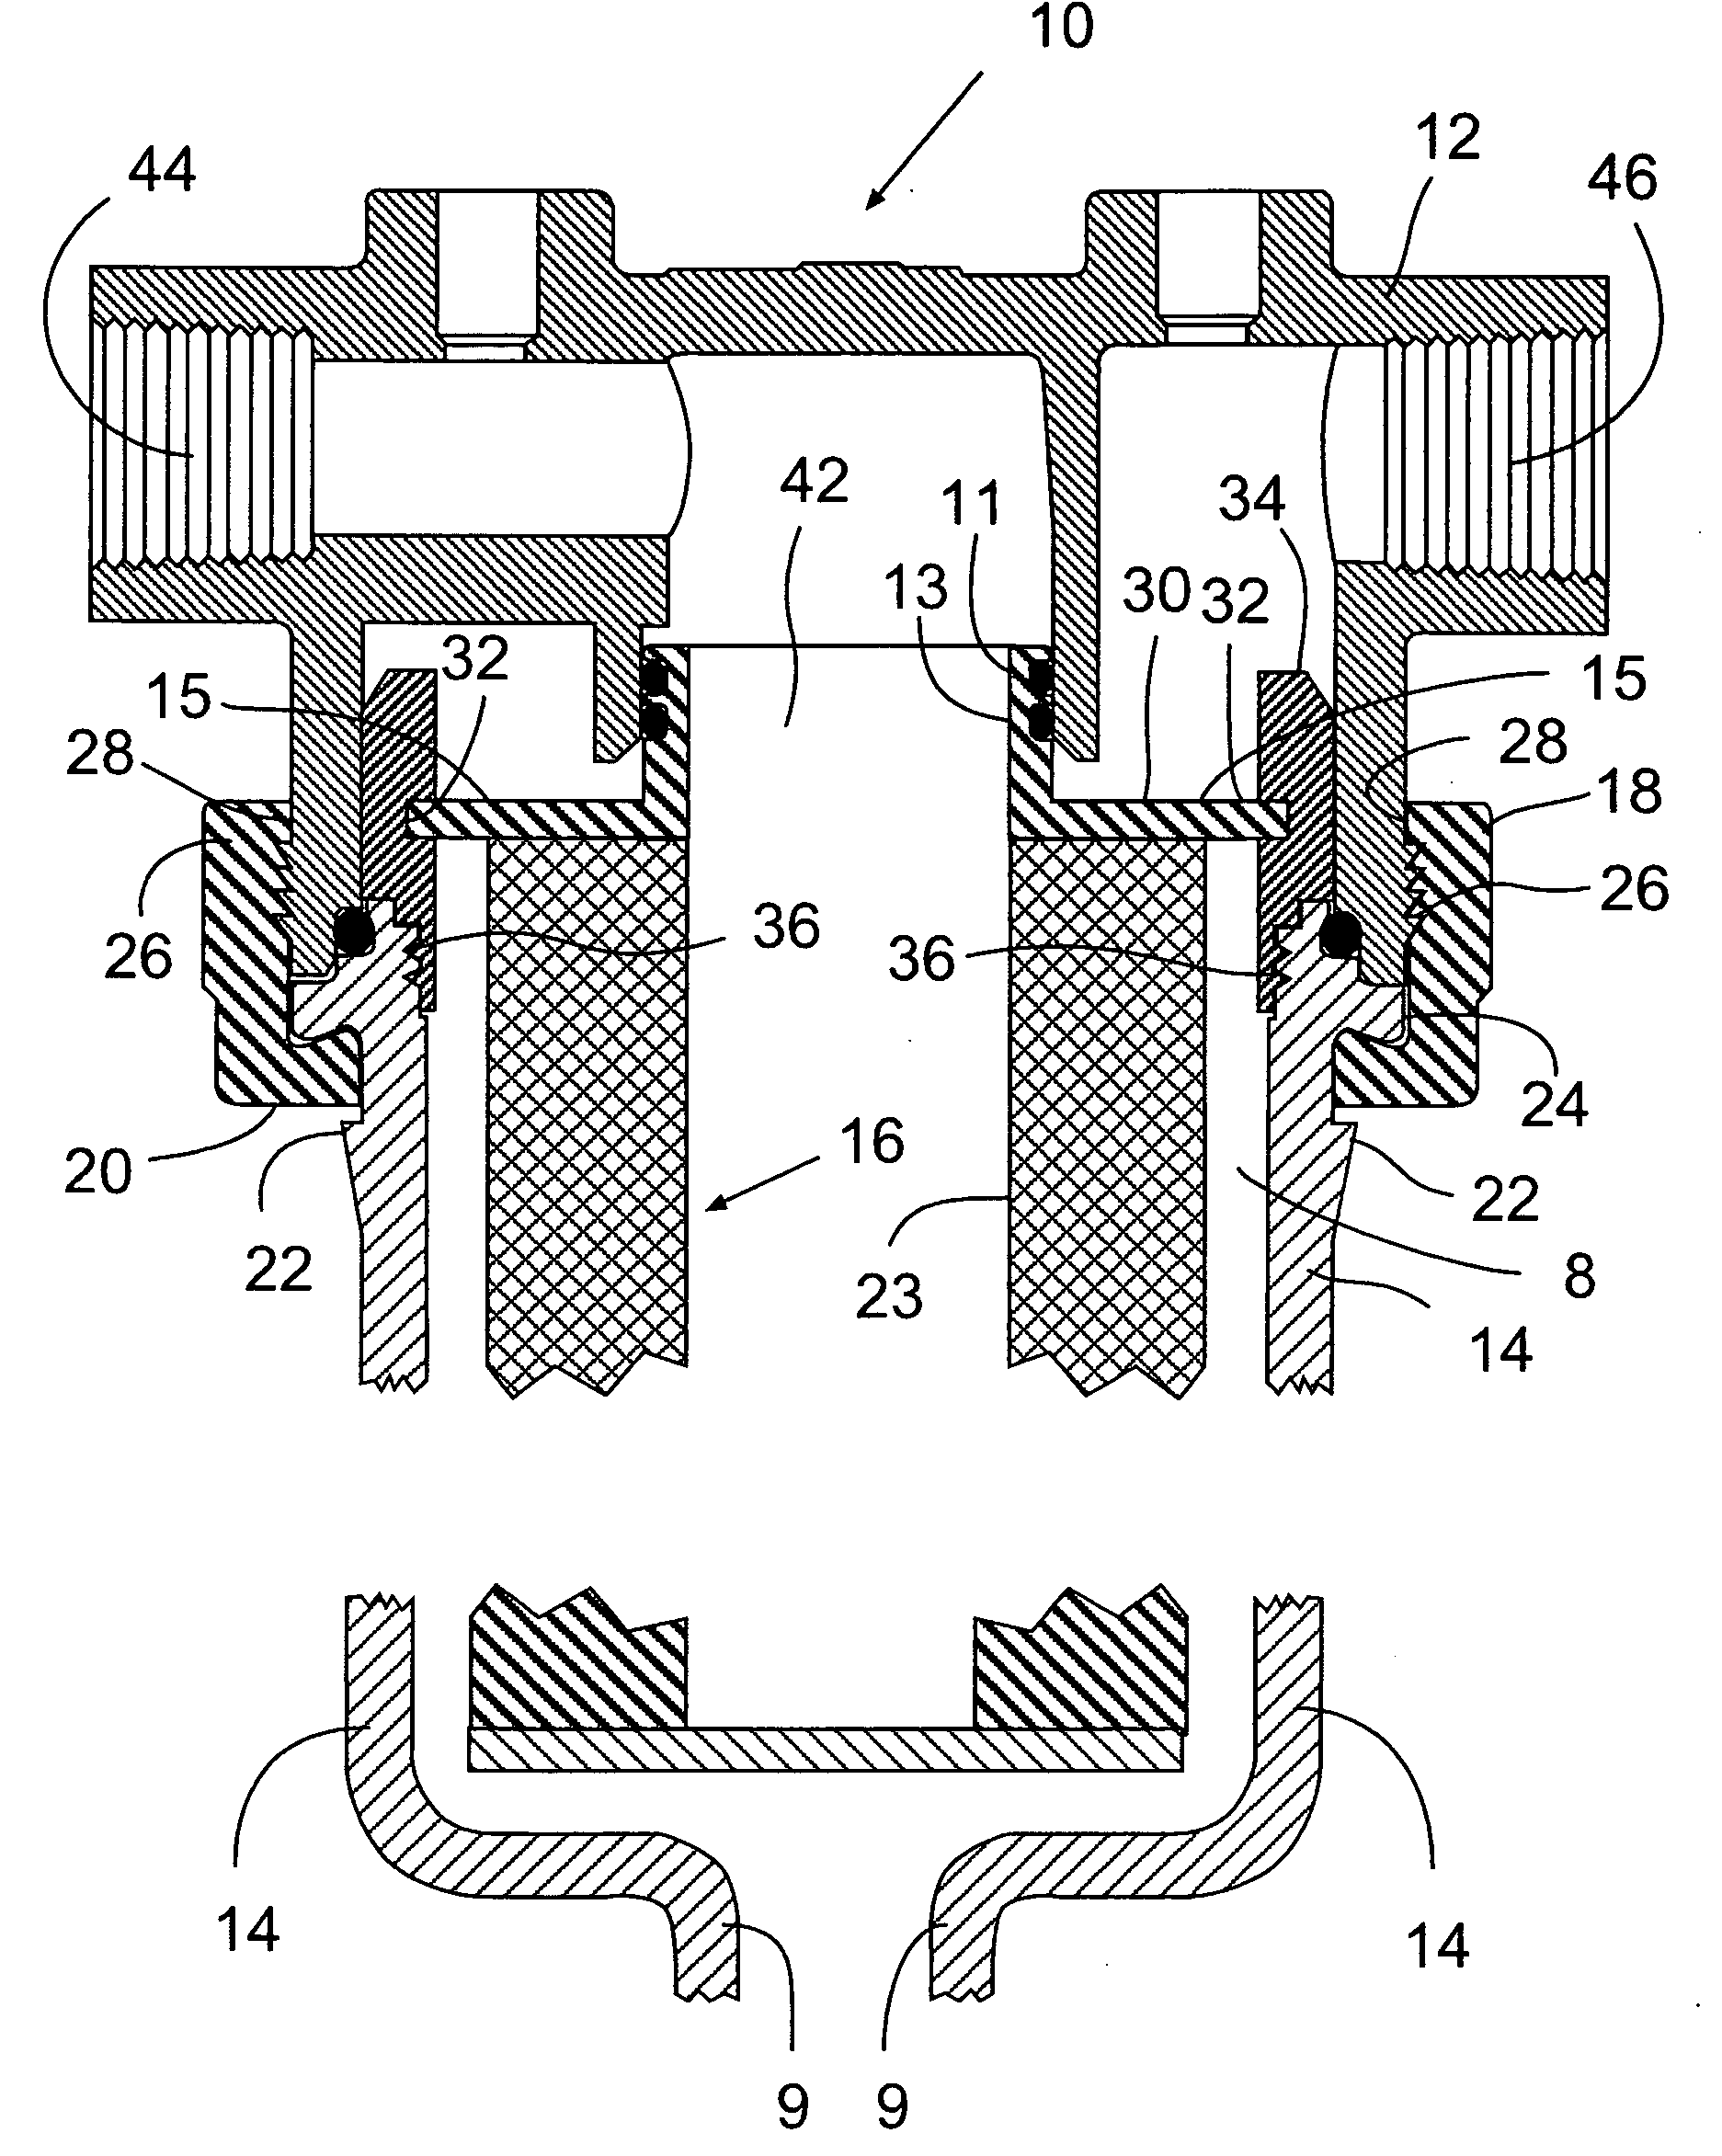 Mass or energy transfer cartridge and module